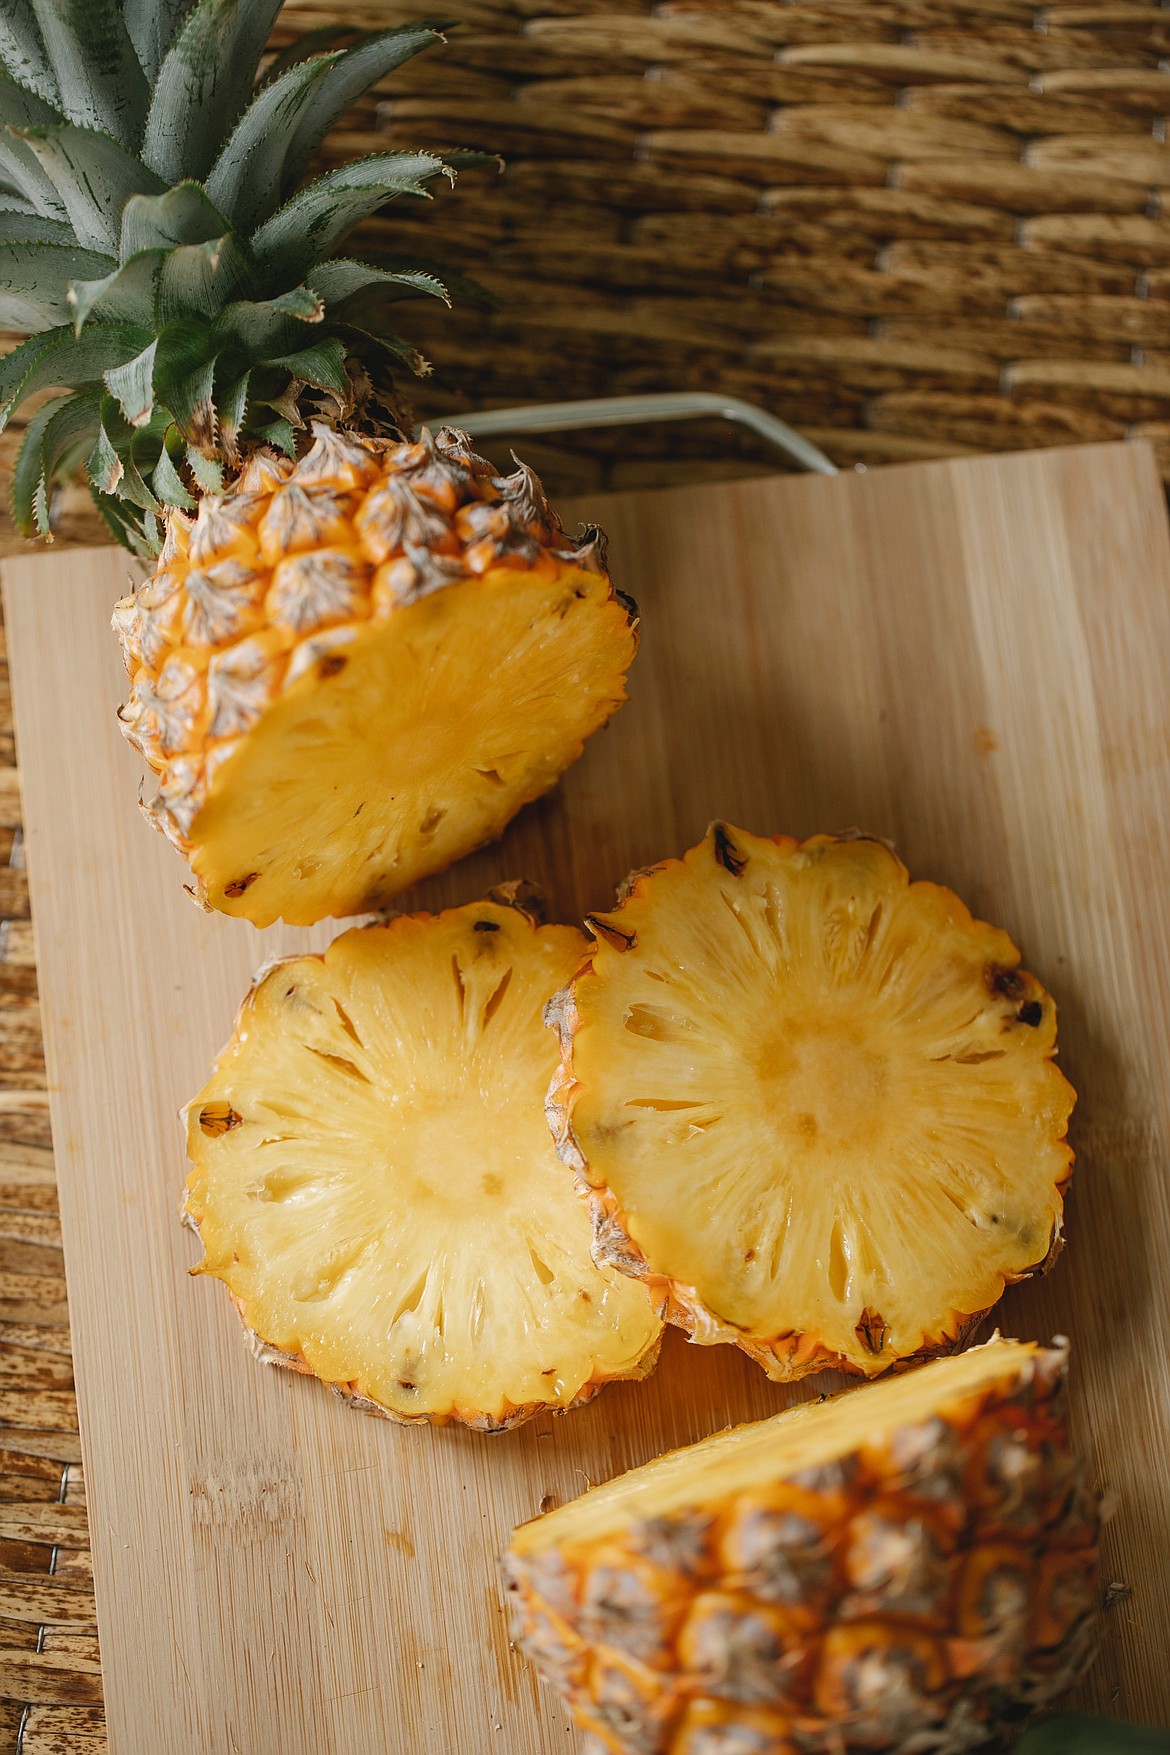 Broiled pineapple is an utterly delicious dessert.